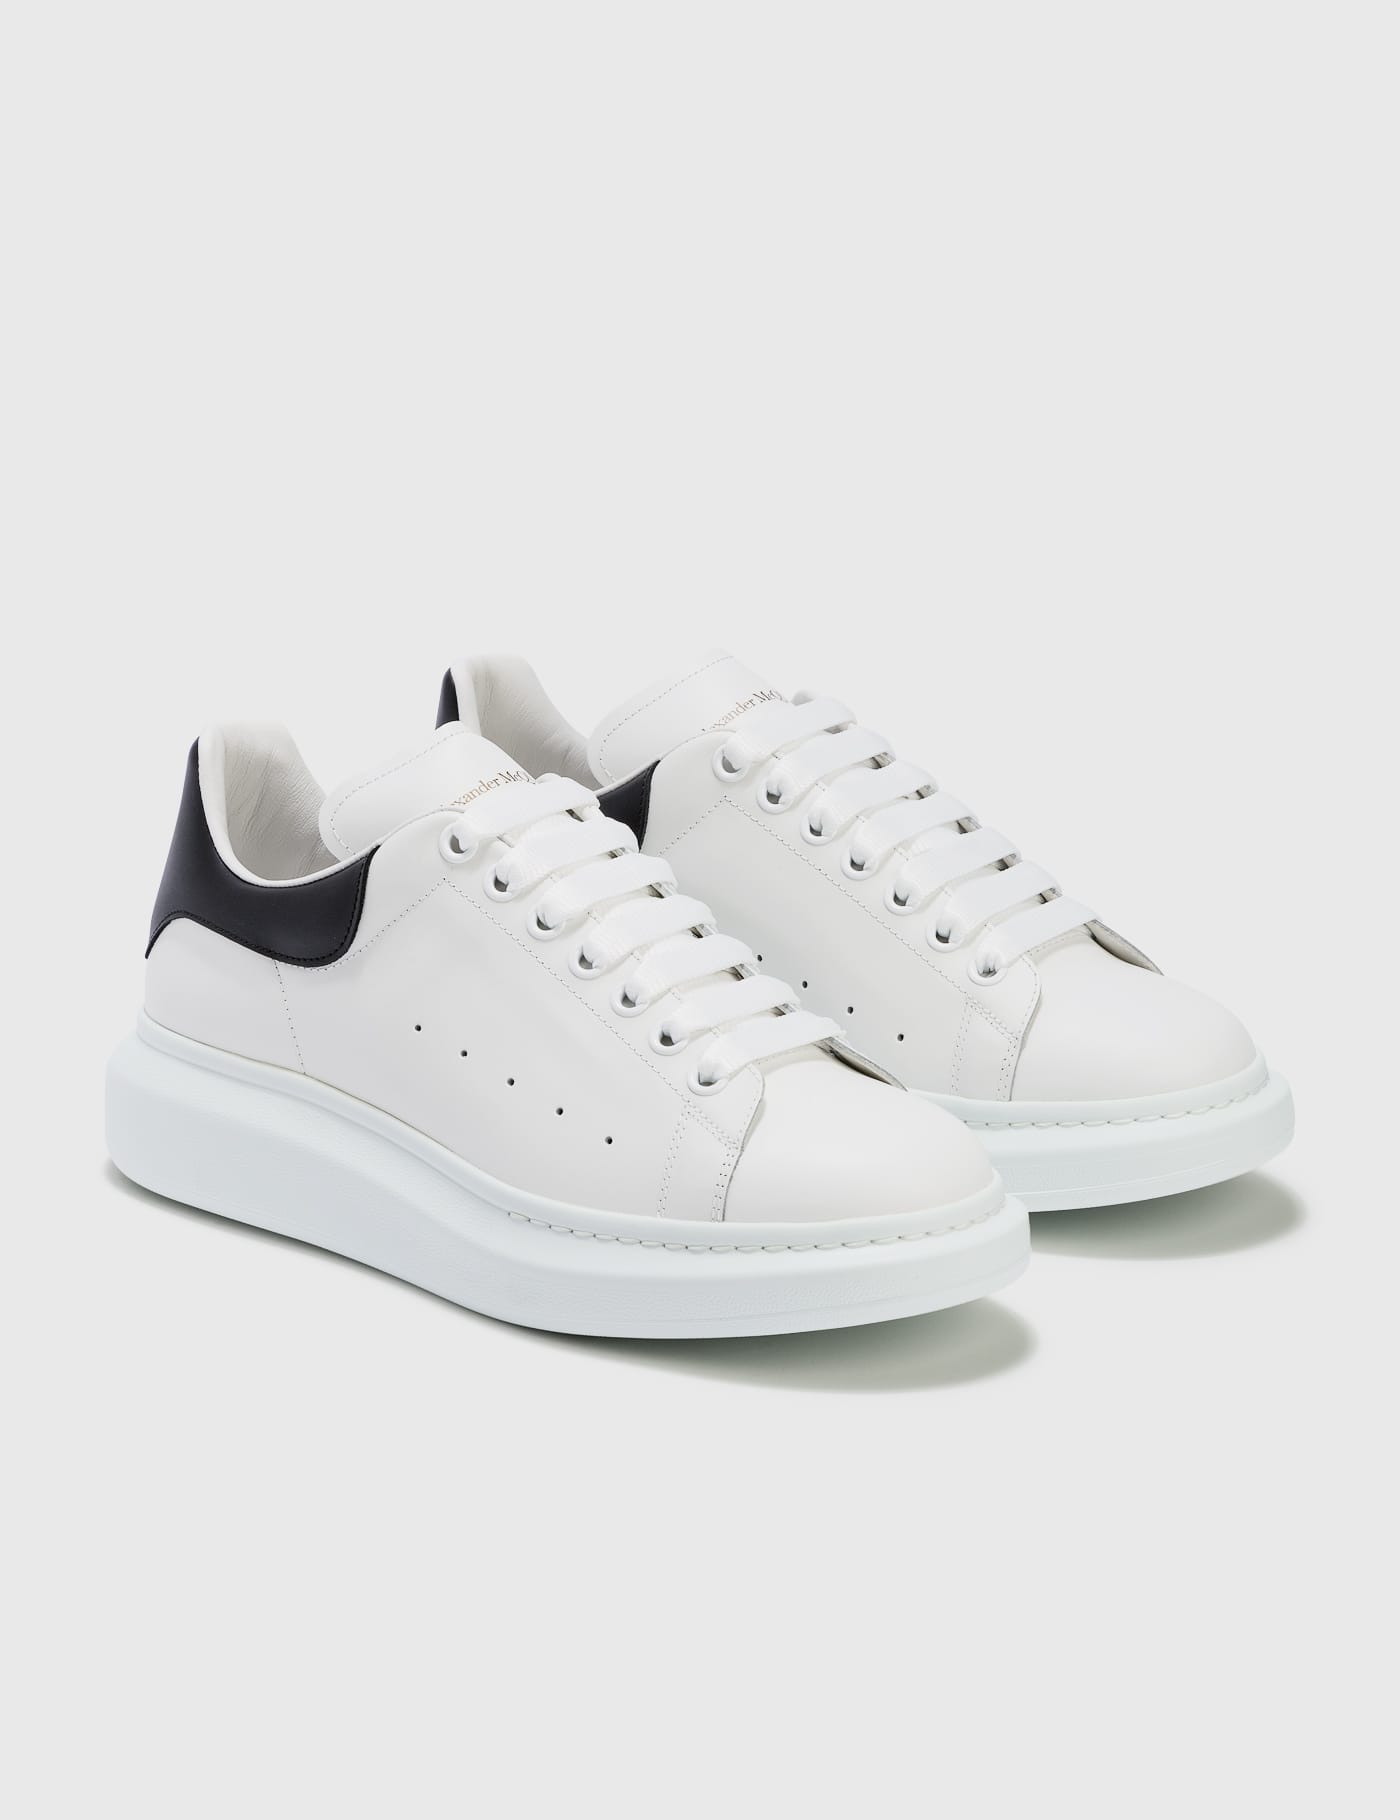 Alexander McQueen | Classic white and beige leather sneakers | Savannahs